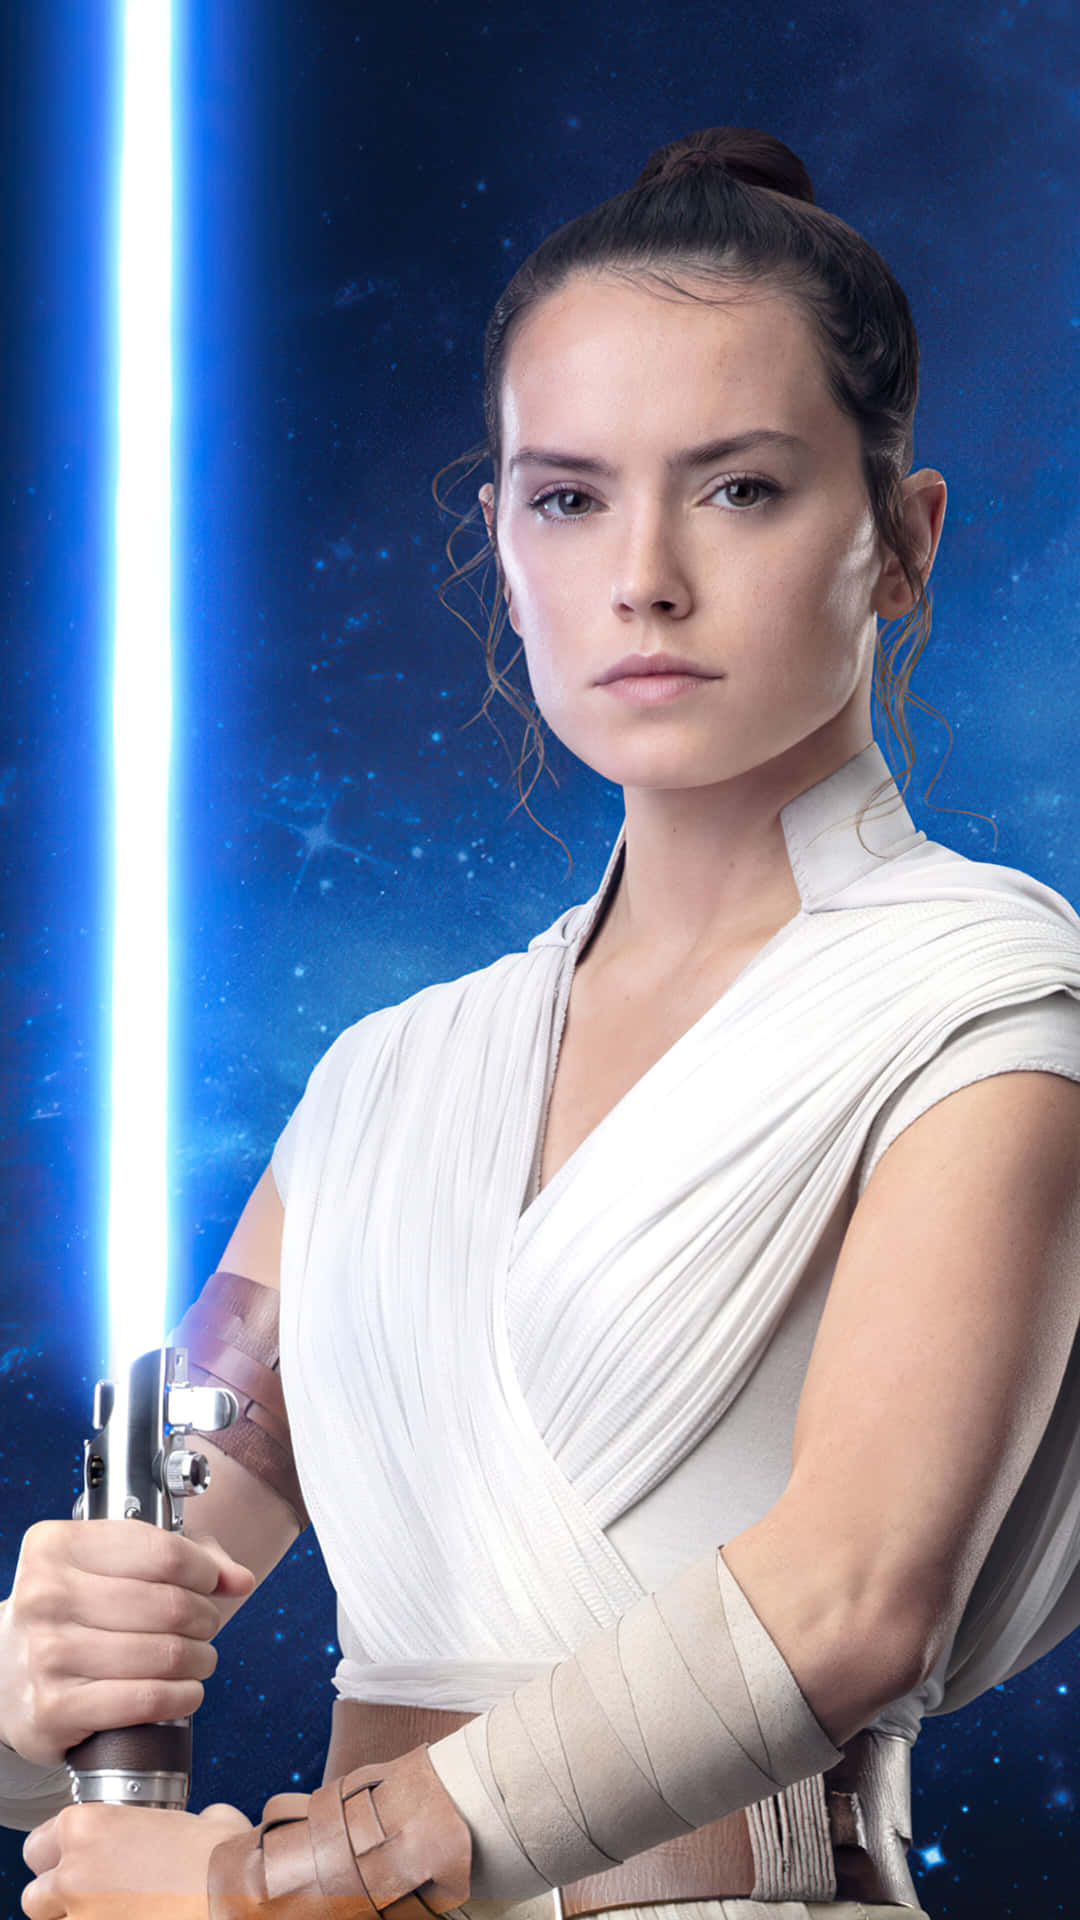 bob hagin recommends images of rey from star wars pic